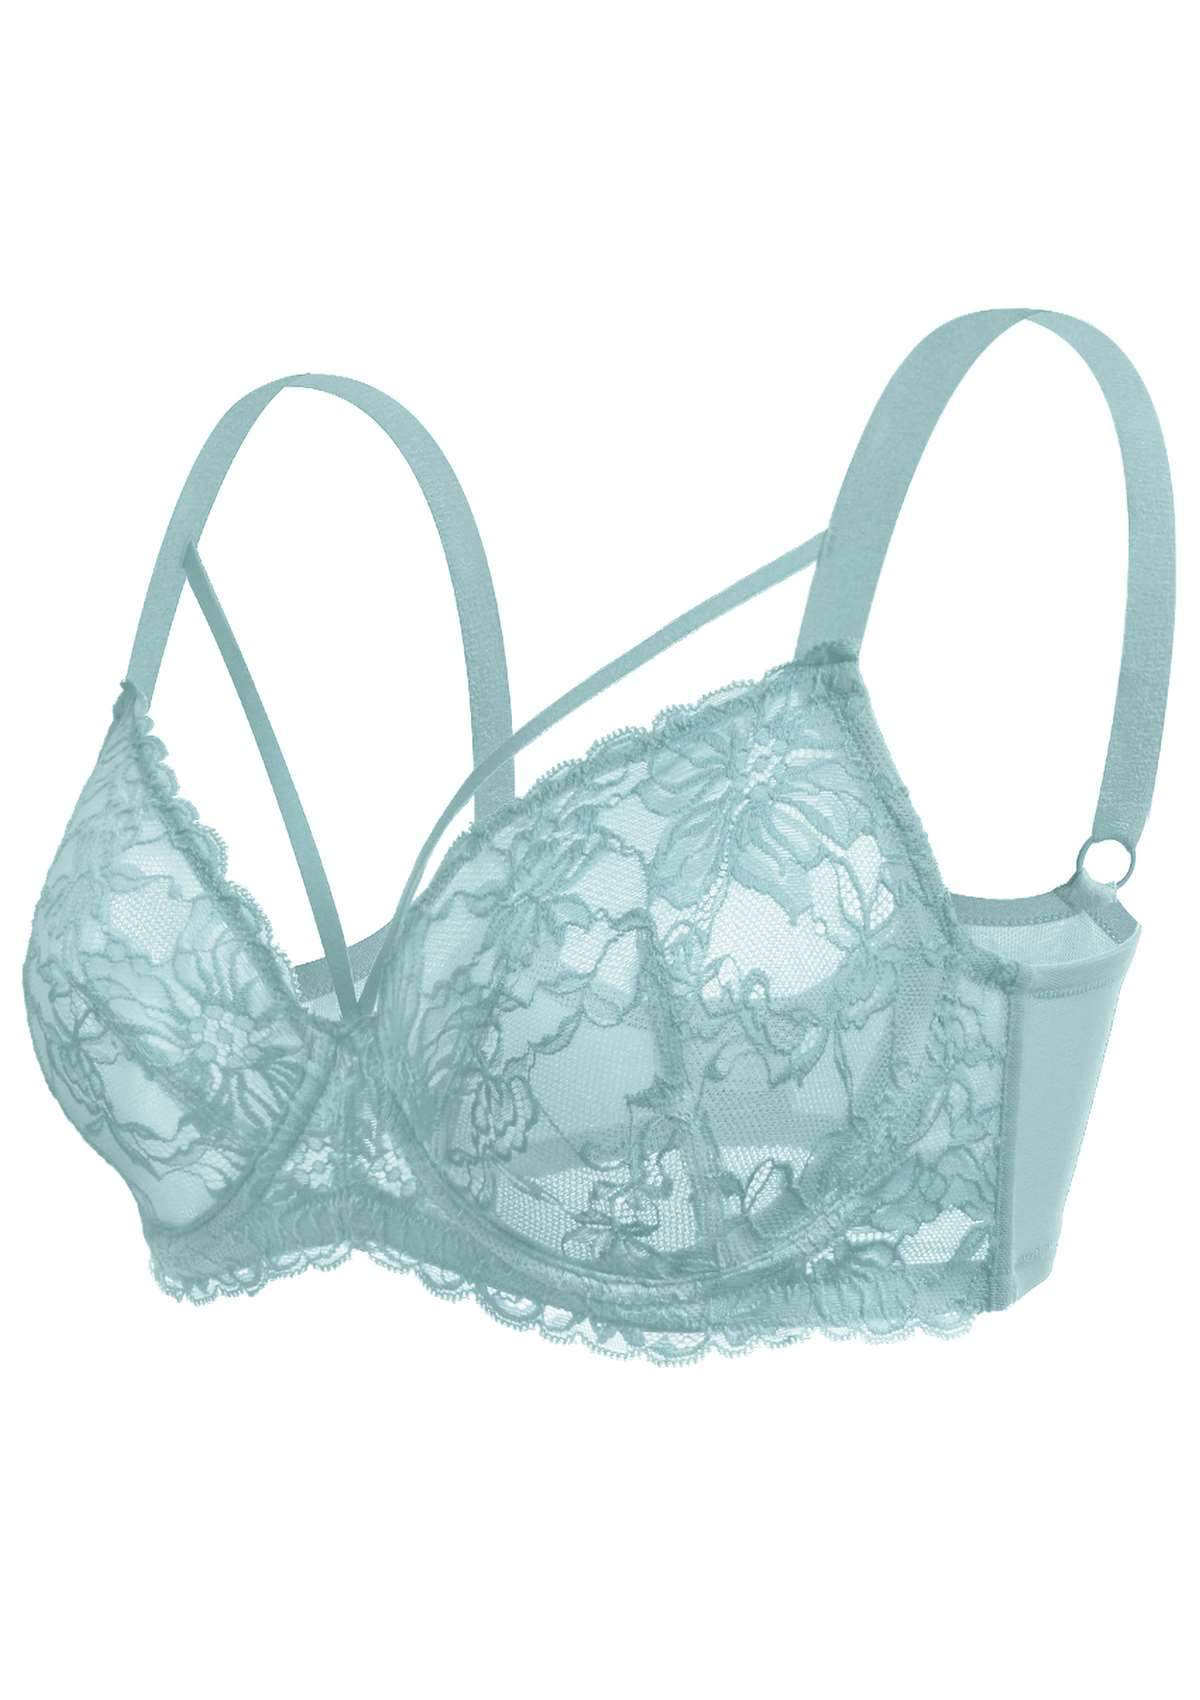 HSIA Pretty In Petals Unlined Lace Bra: Comfortable And Supportive Bra - Pewter Blue / 34 / C